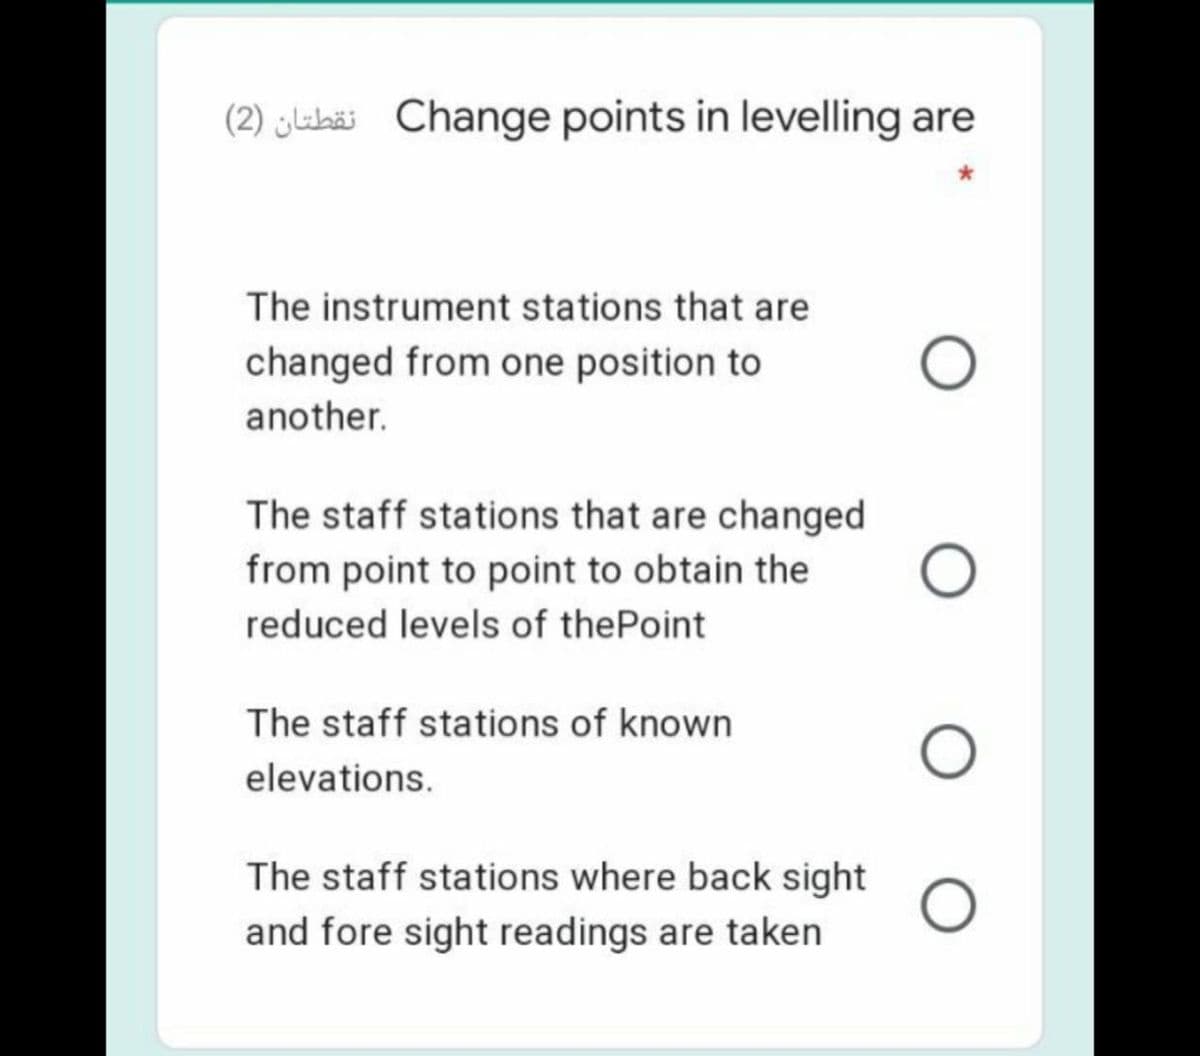 (2) jkkäi Change points in levelling are
The instrument stations that are
changed from one position to
another.
The staff stations that are changed
from point to point to obtain the
reduced levels of thePoint
The staff stations of known
elevations.
The staff stations where back sight
and fore sight readings are taken
